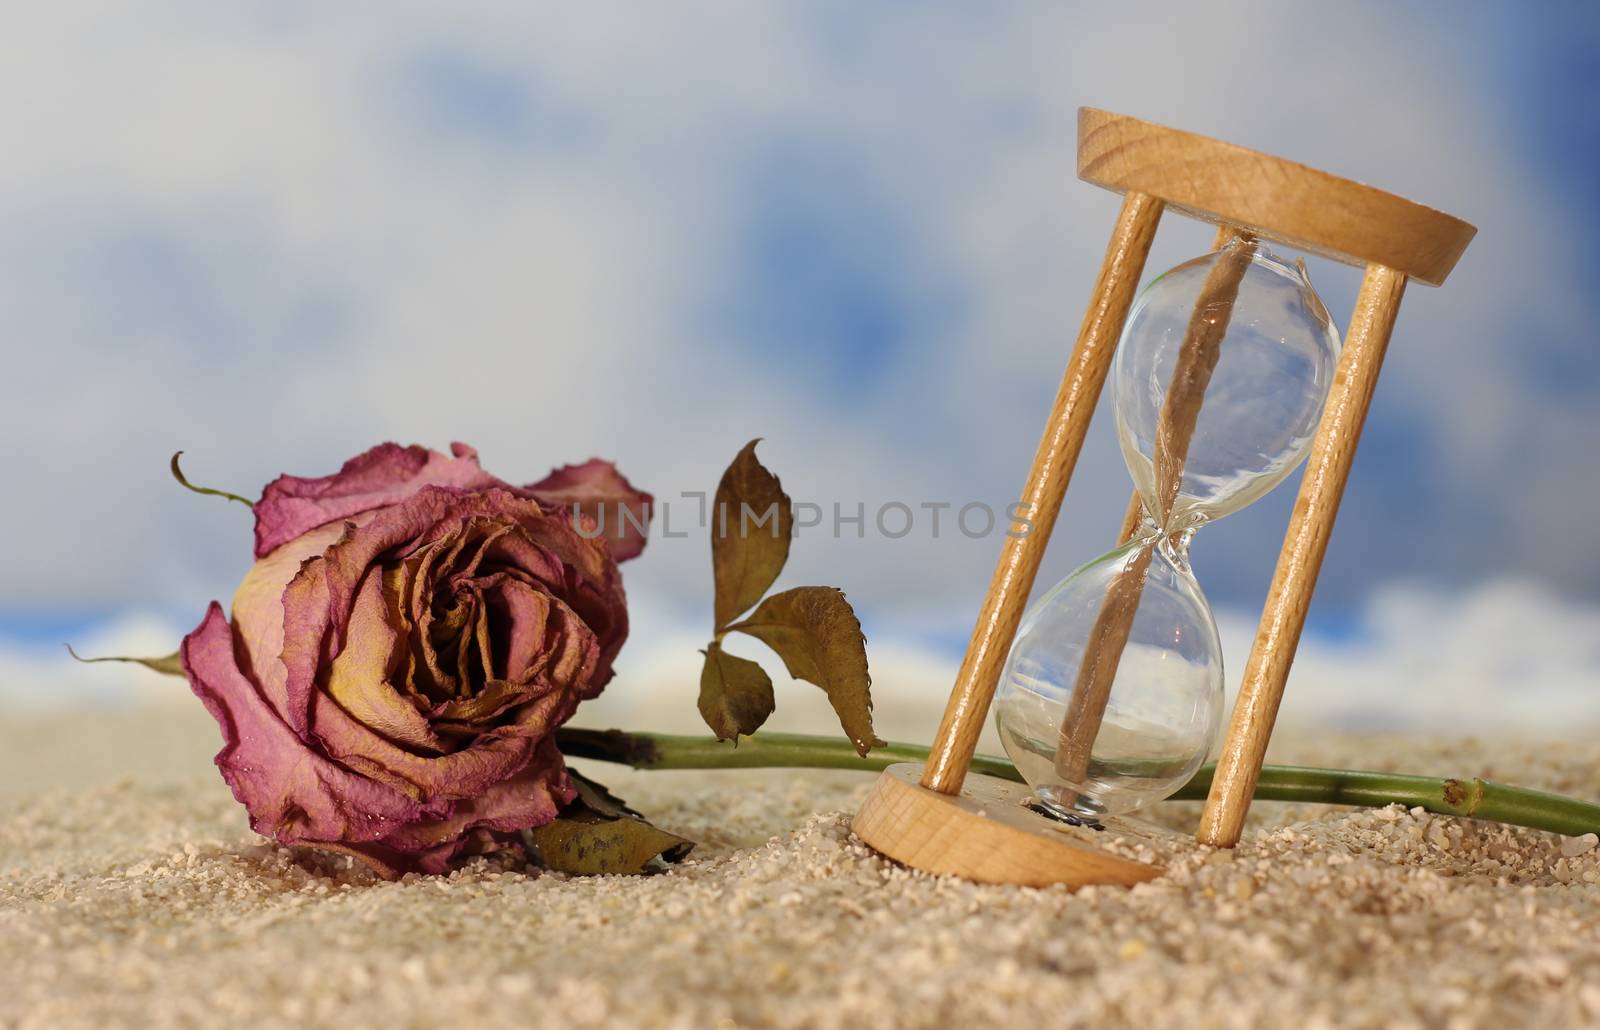 Dried Rose and Broken Hourglass by Marti157900